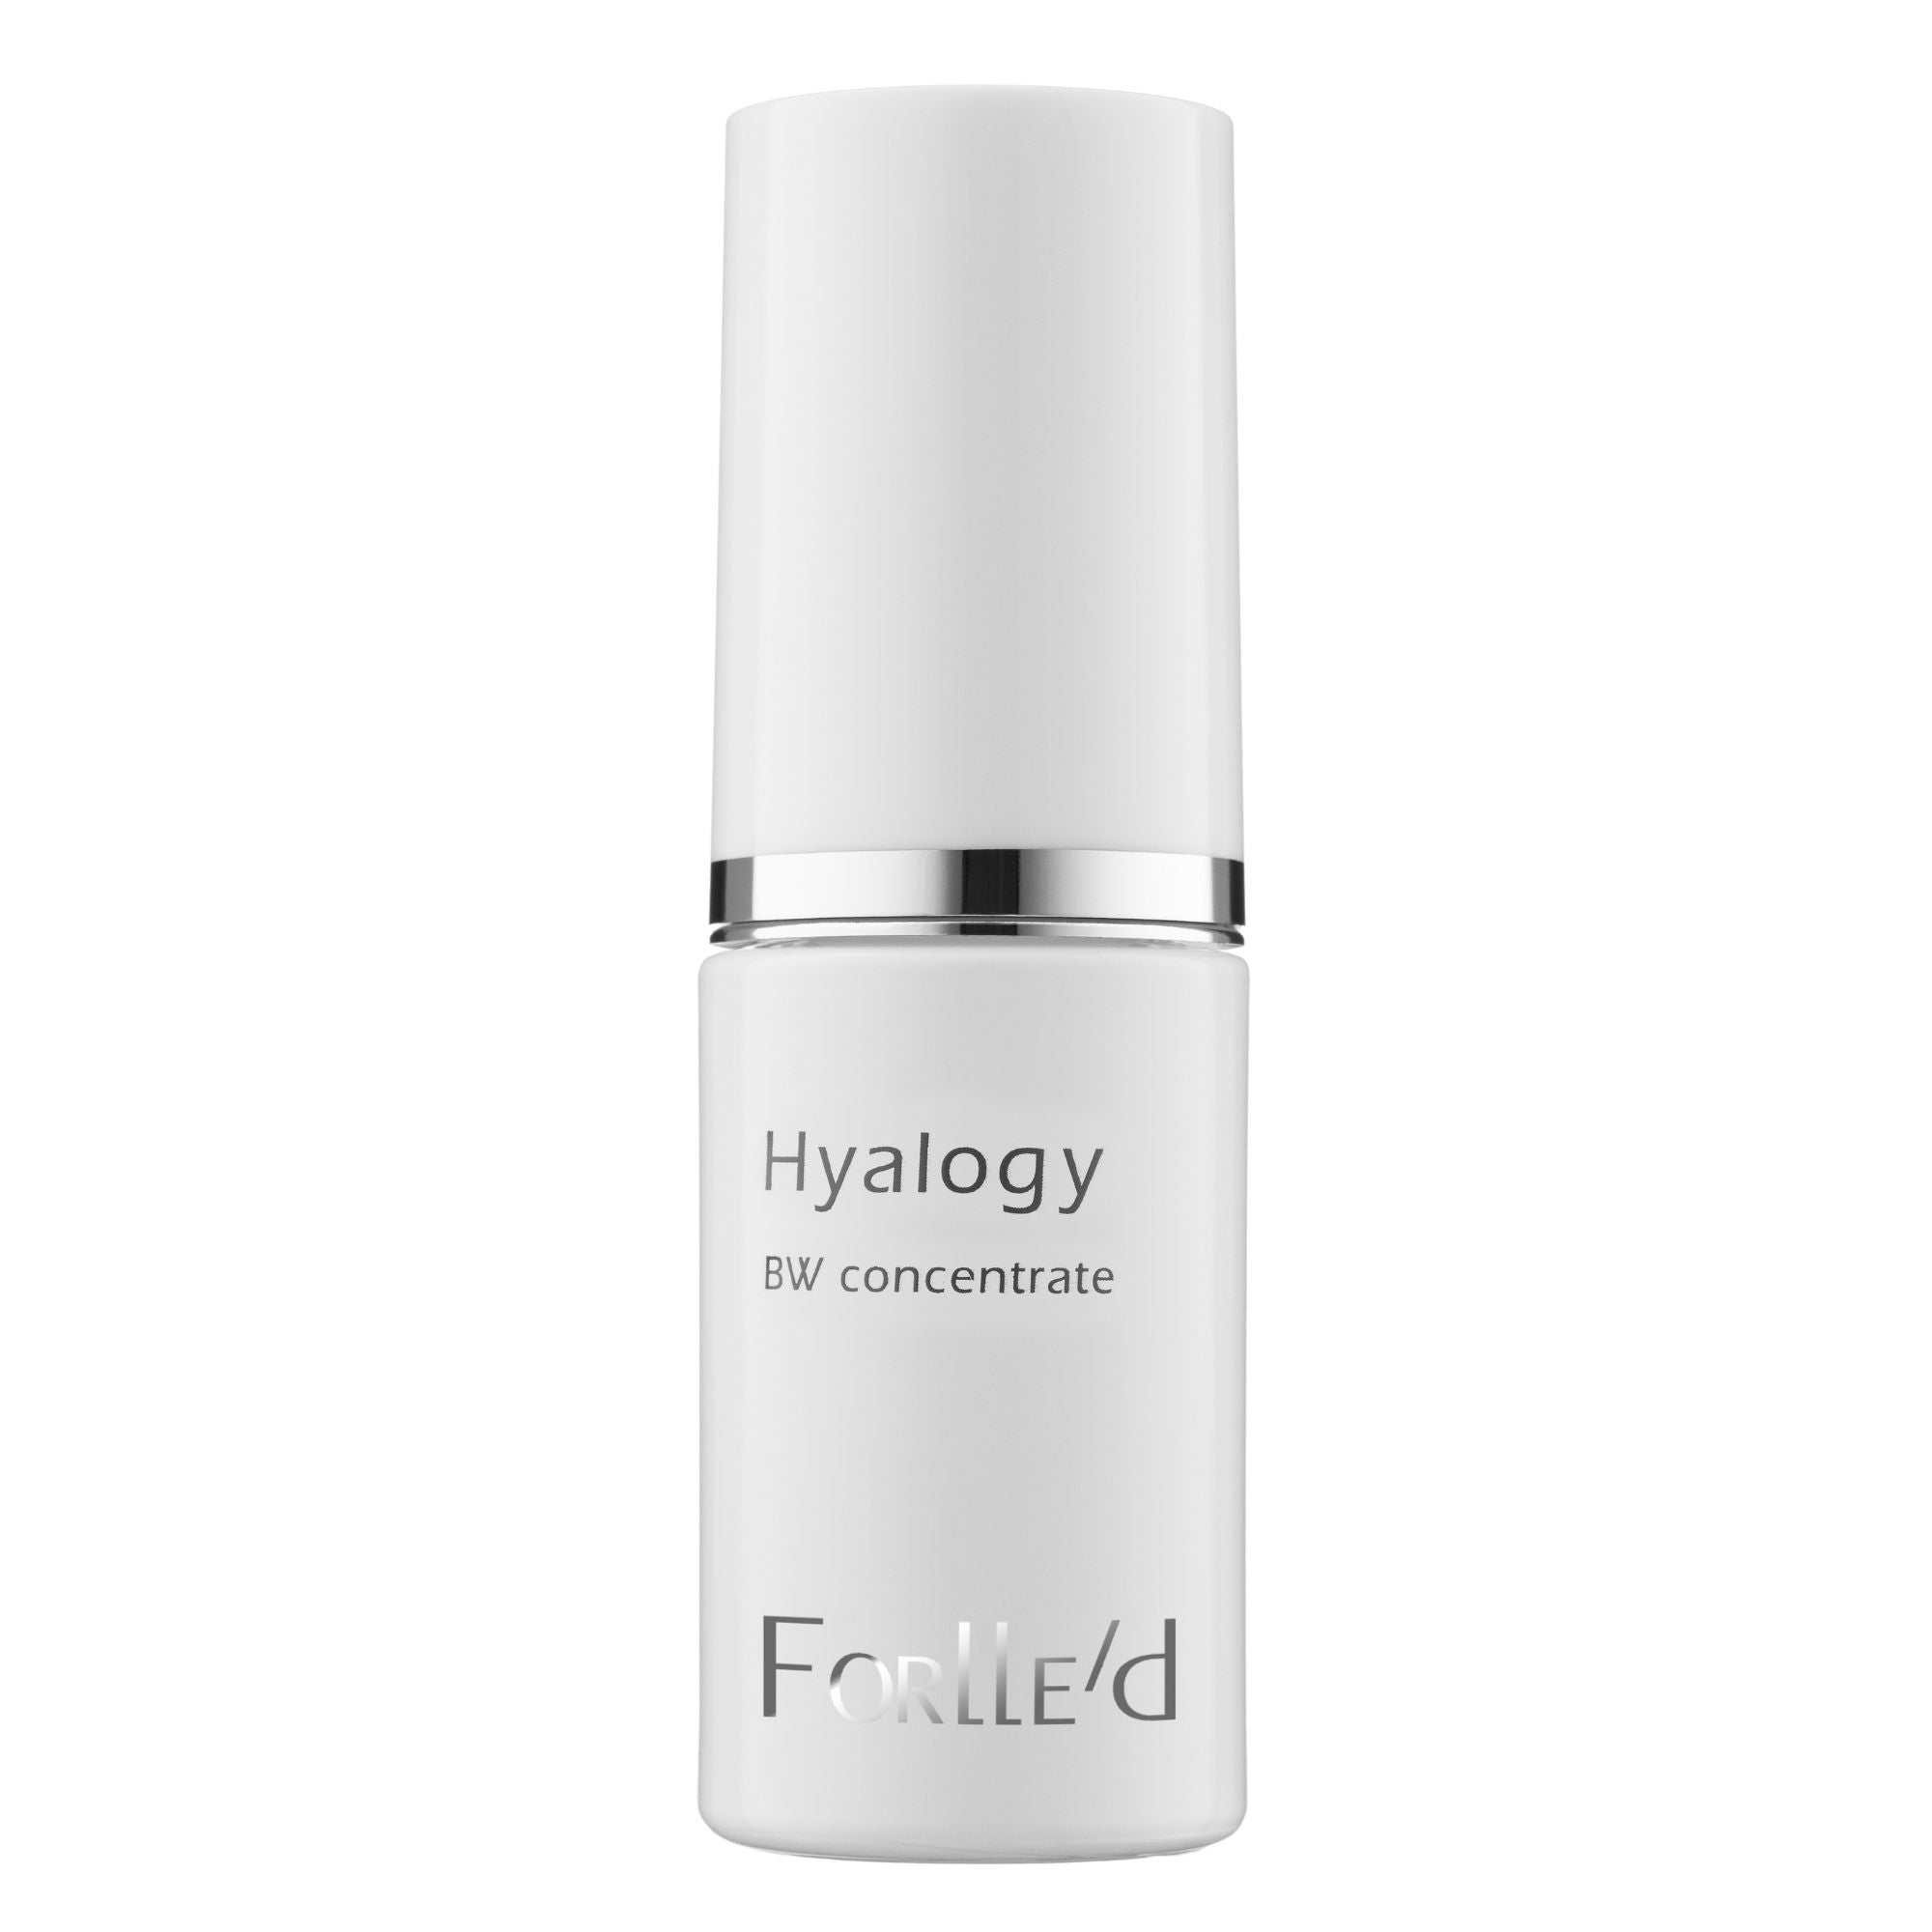 Forlle'd Hyalogy BW Concentrate (15ml)